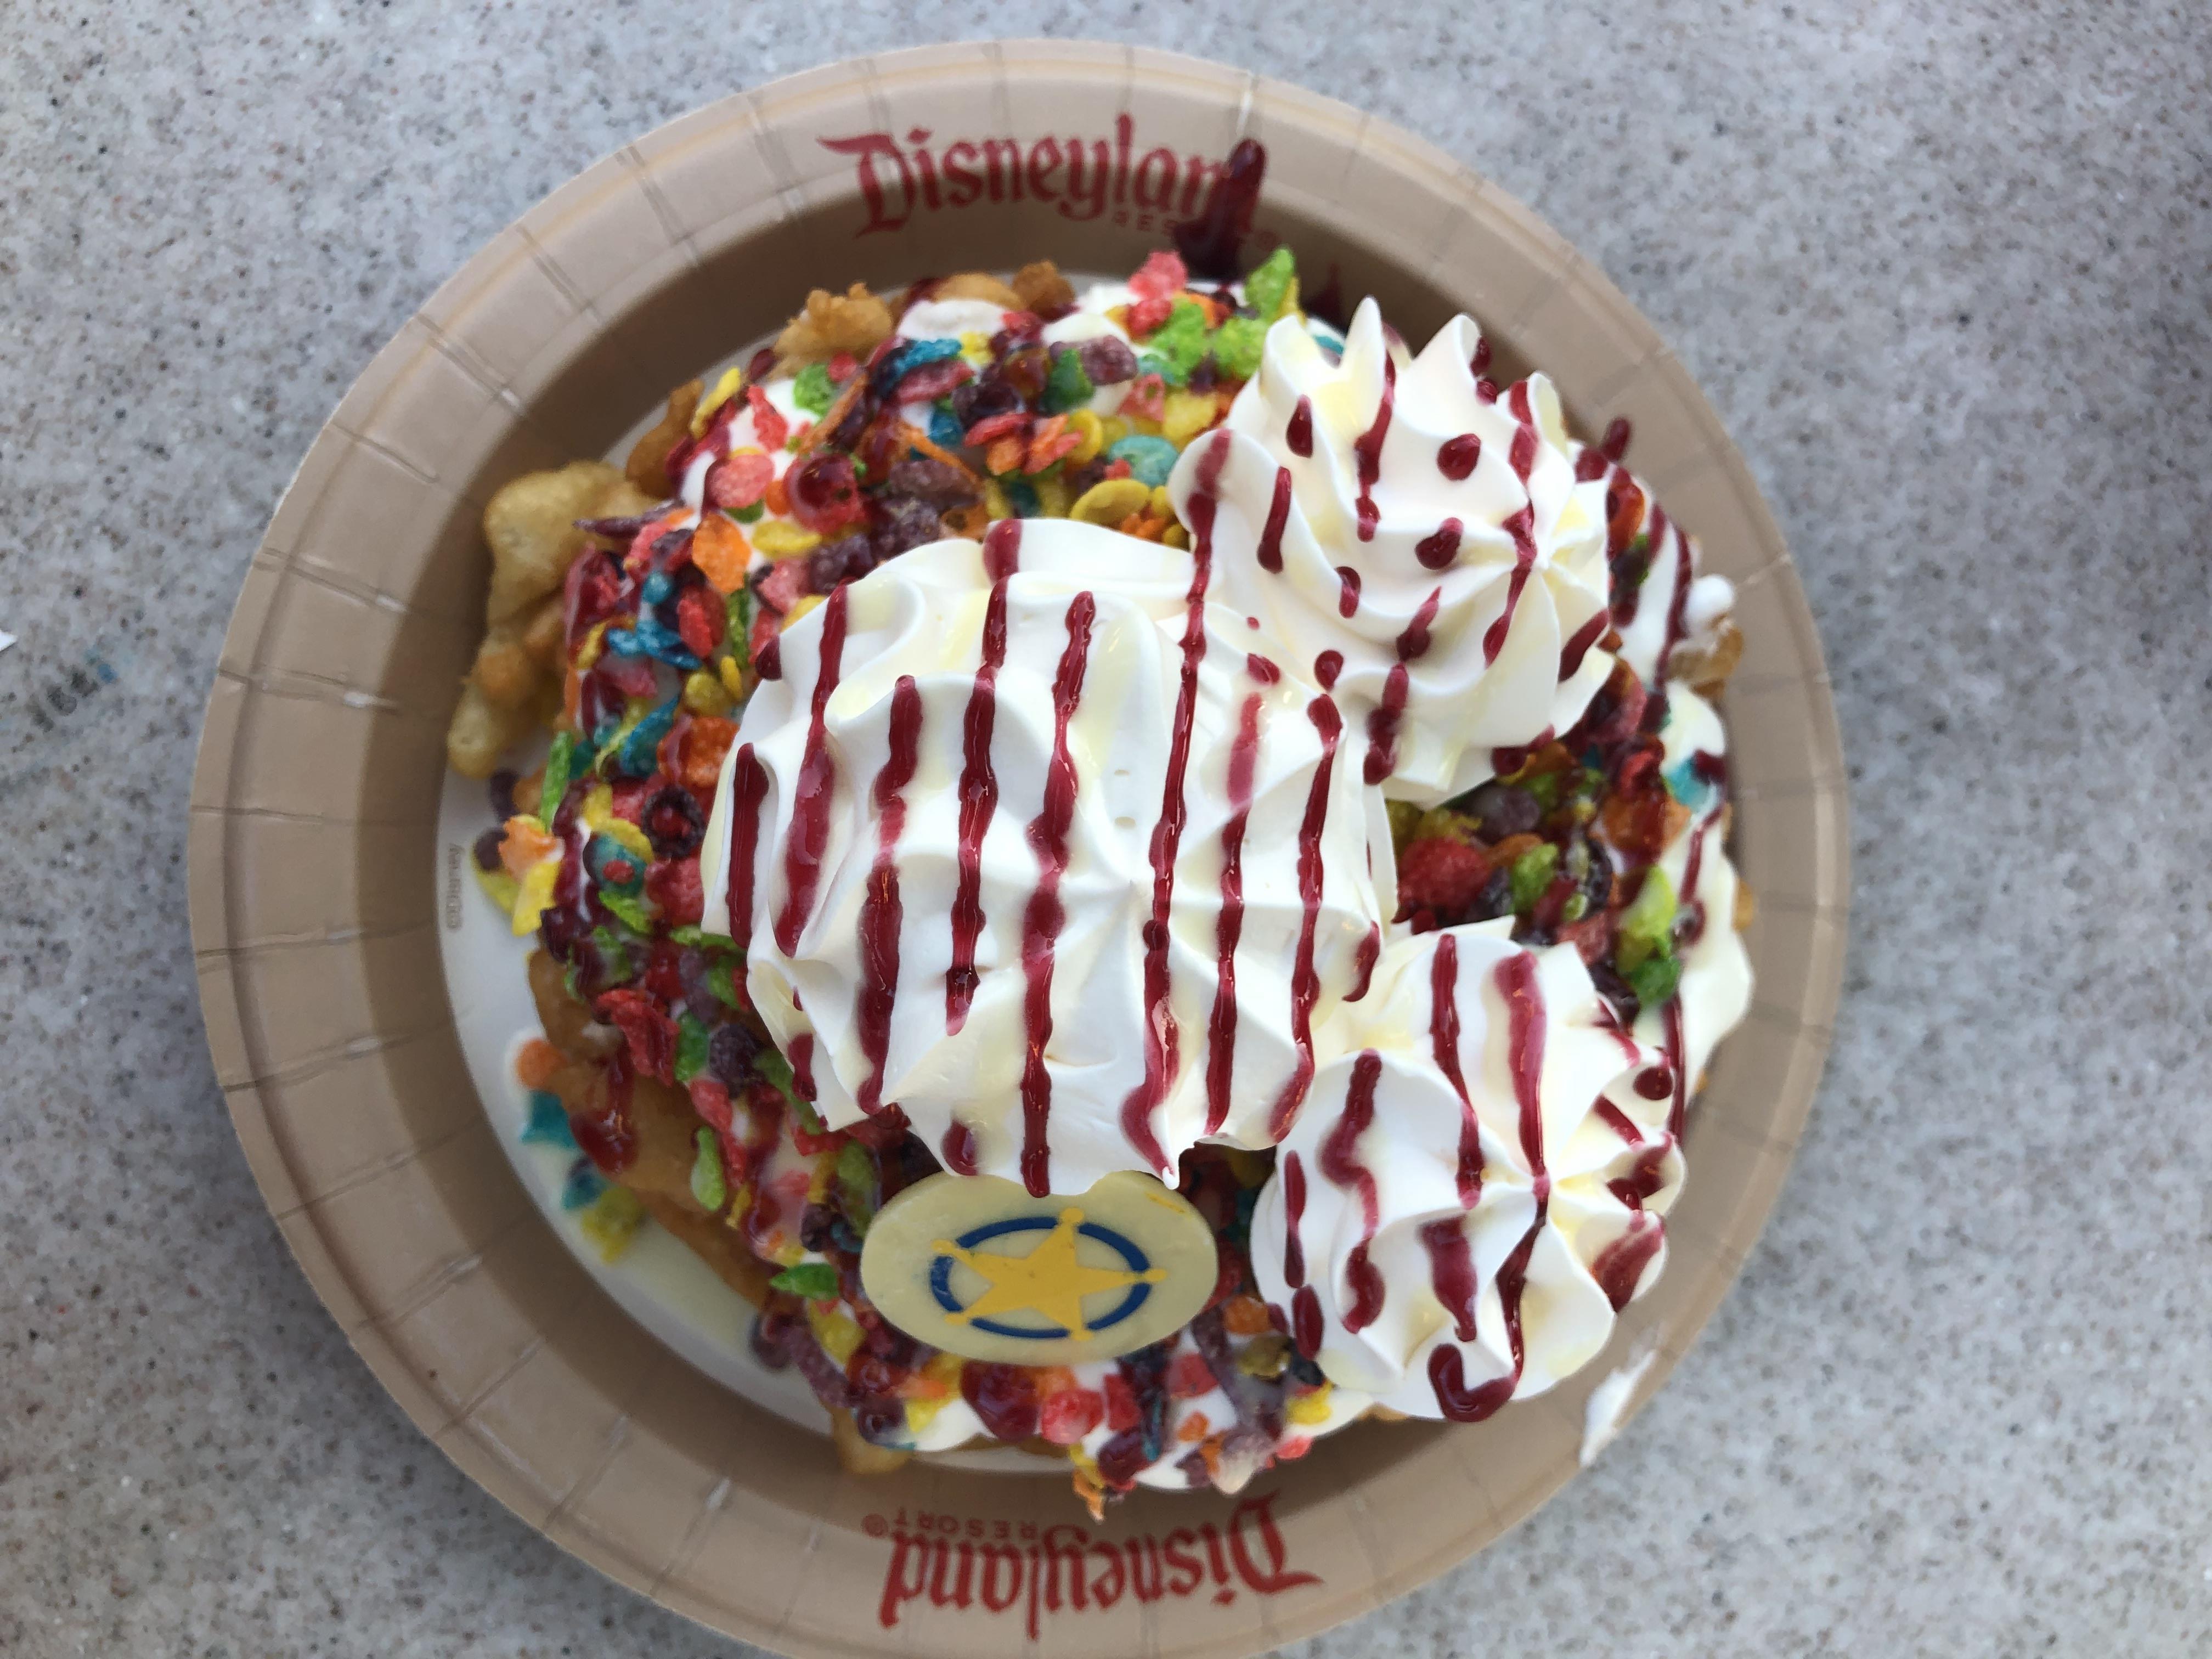 A plate of funnel cake, covered in fruity pebbles and whipped cream shaped like Mickey Mouse ears.